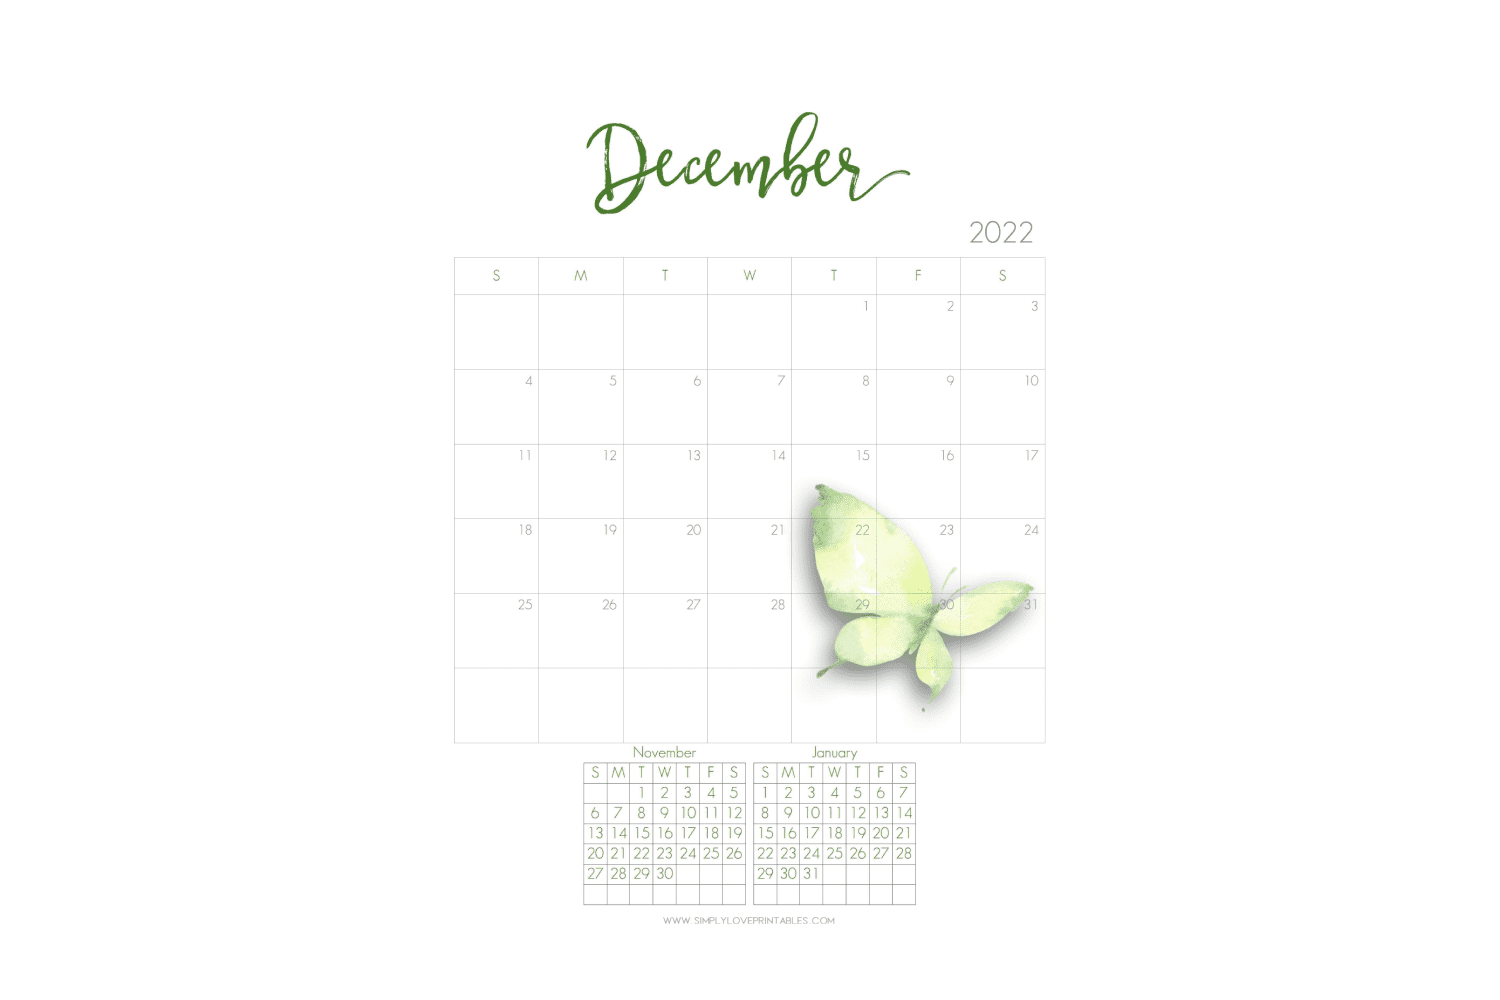 Simple december calendar with green butterfly drawn on it.